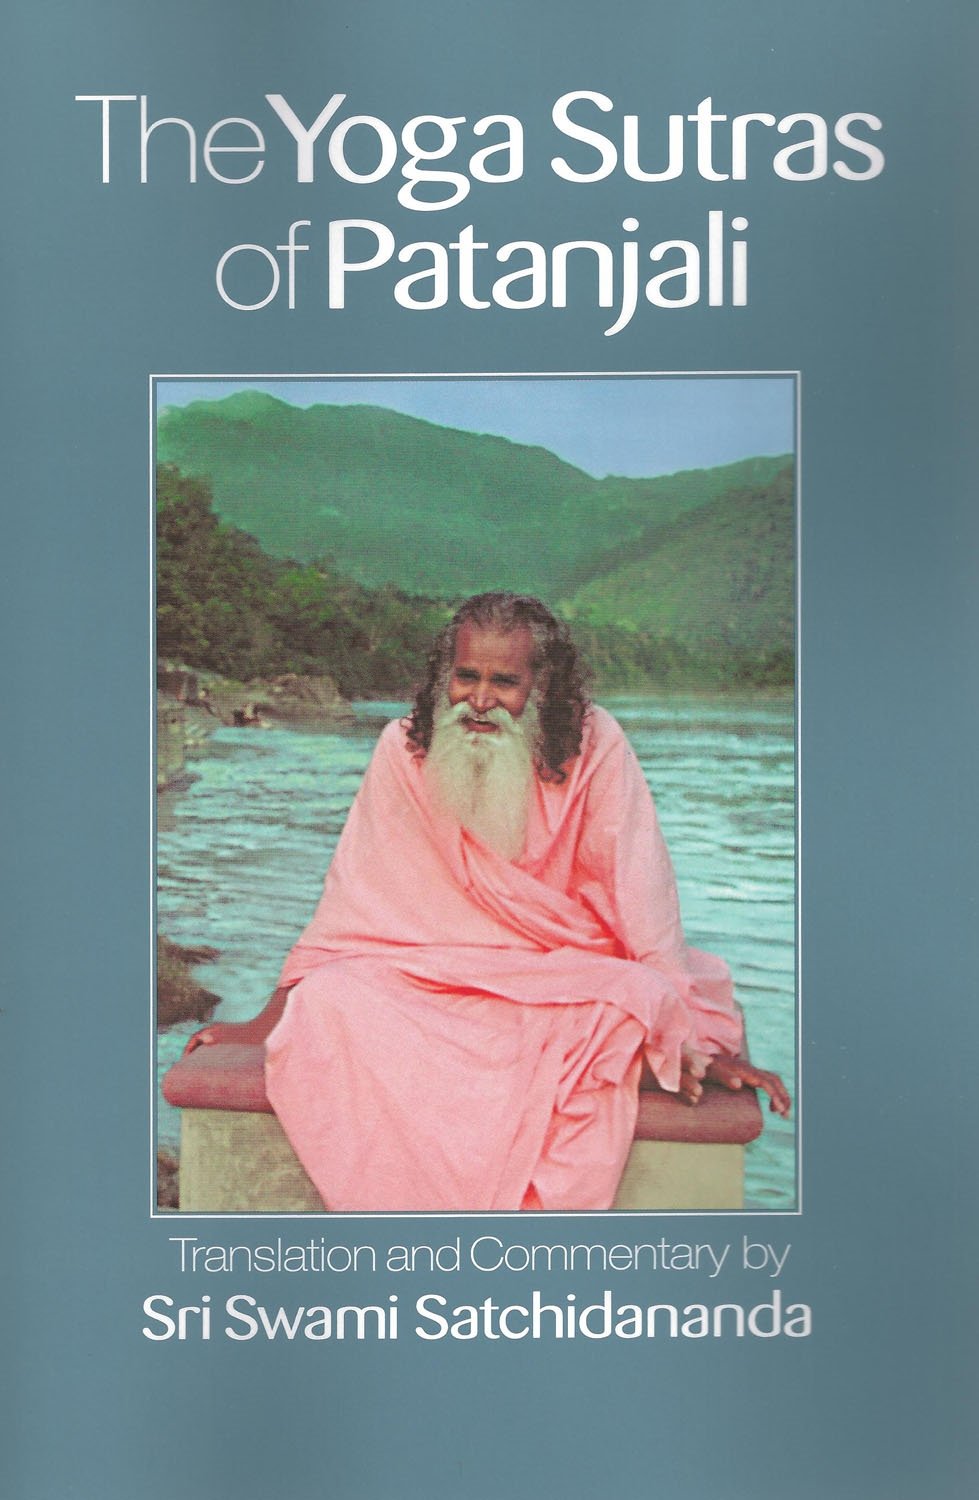 The Yoga Sutras of Patanjali by Sri Swami Satchidananda